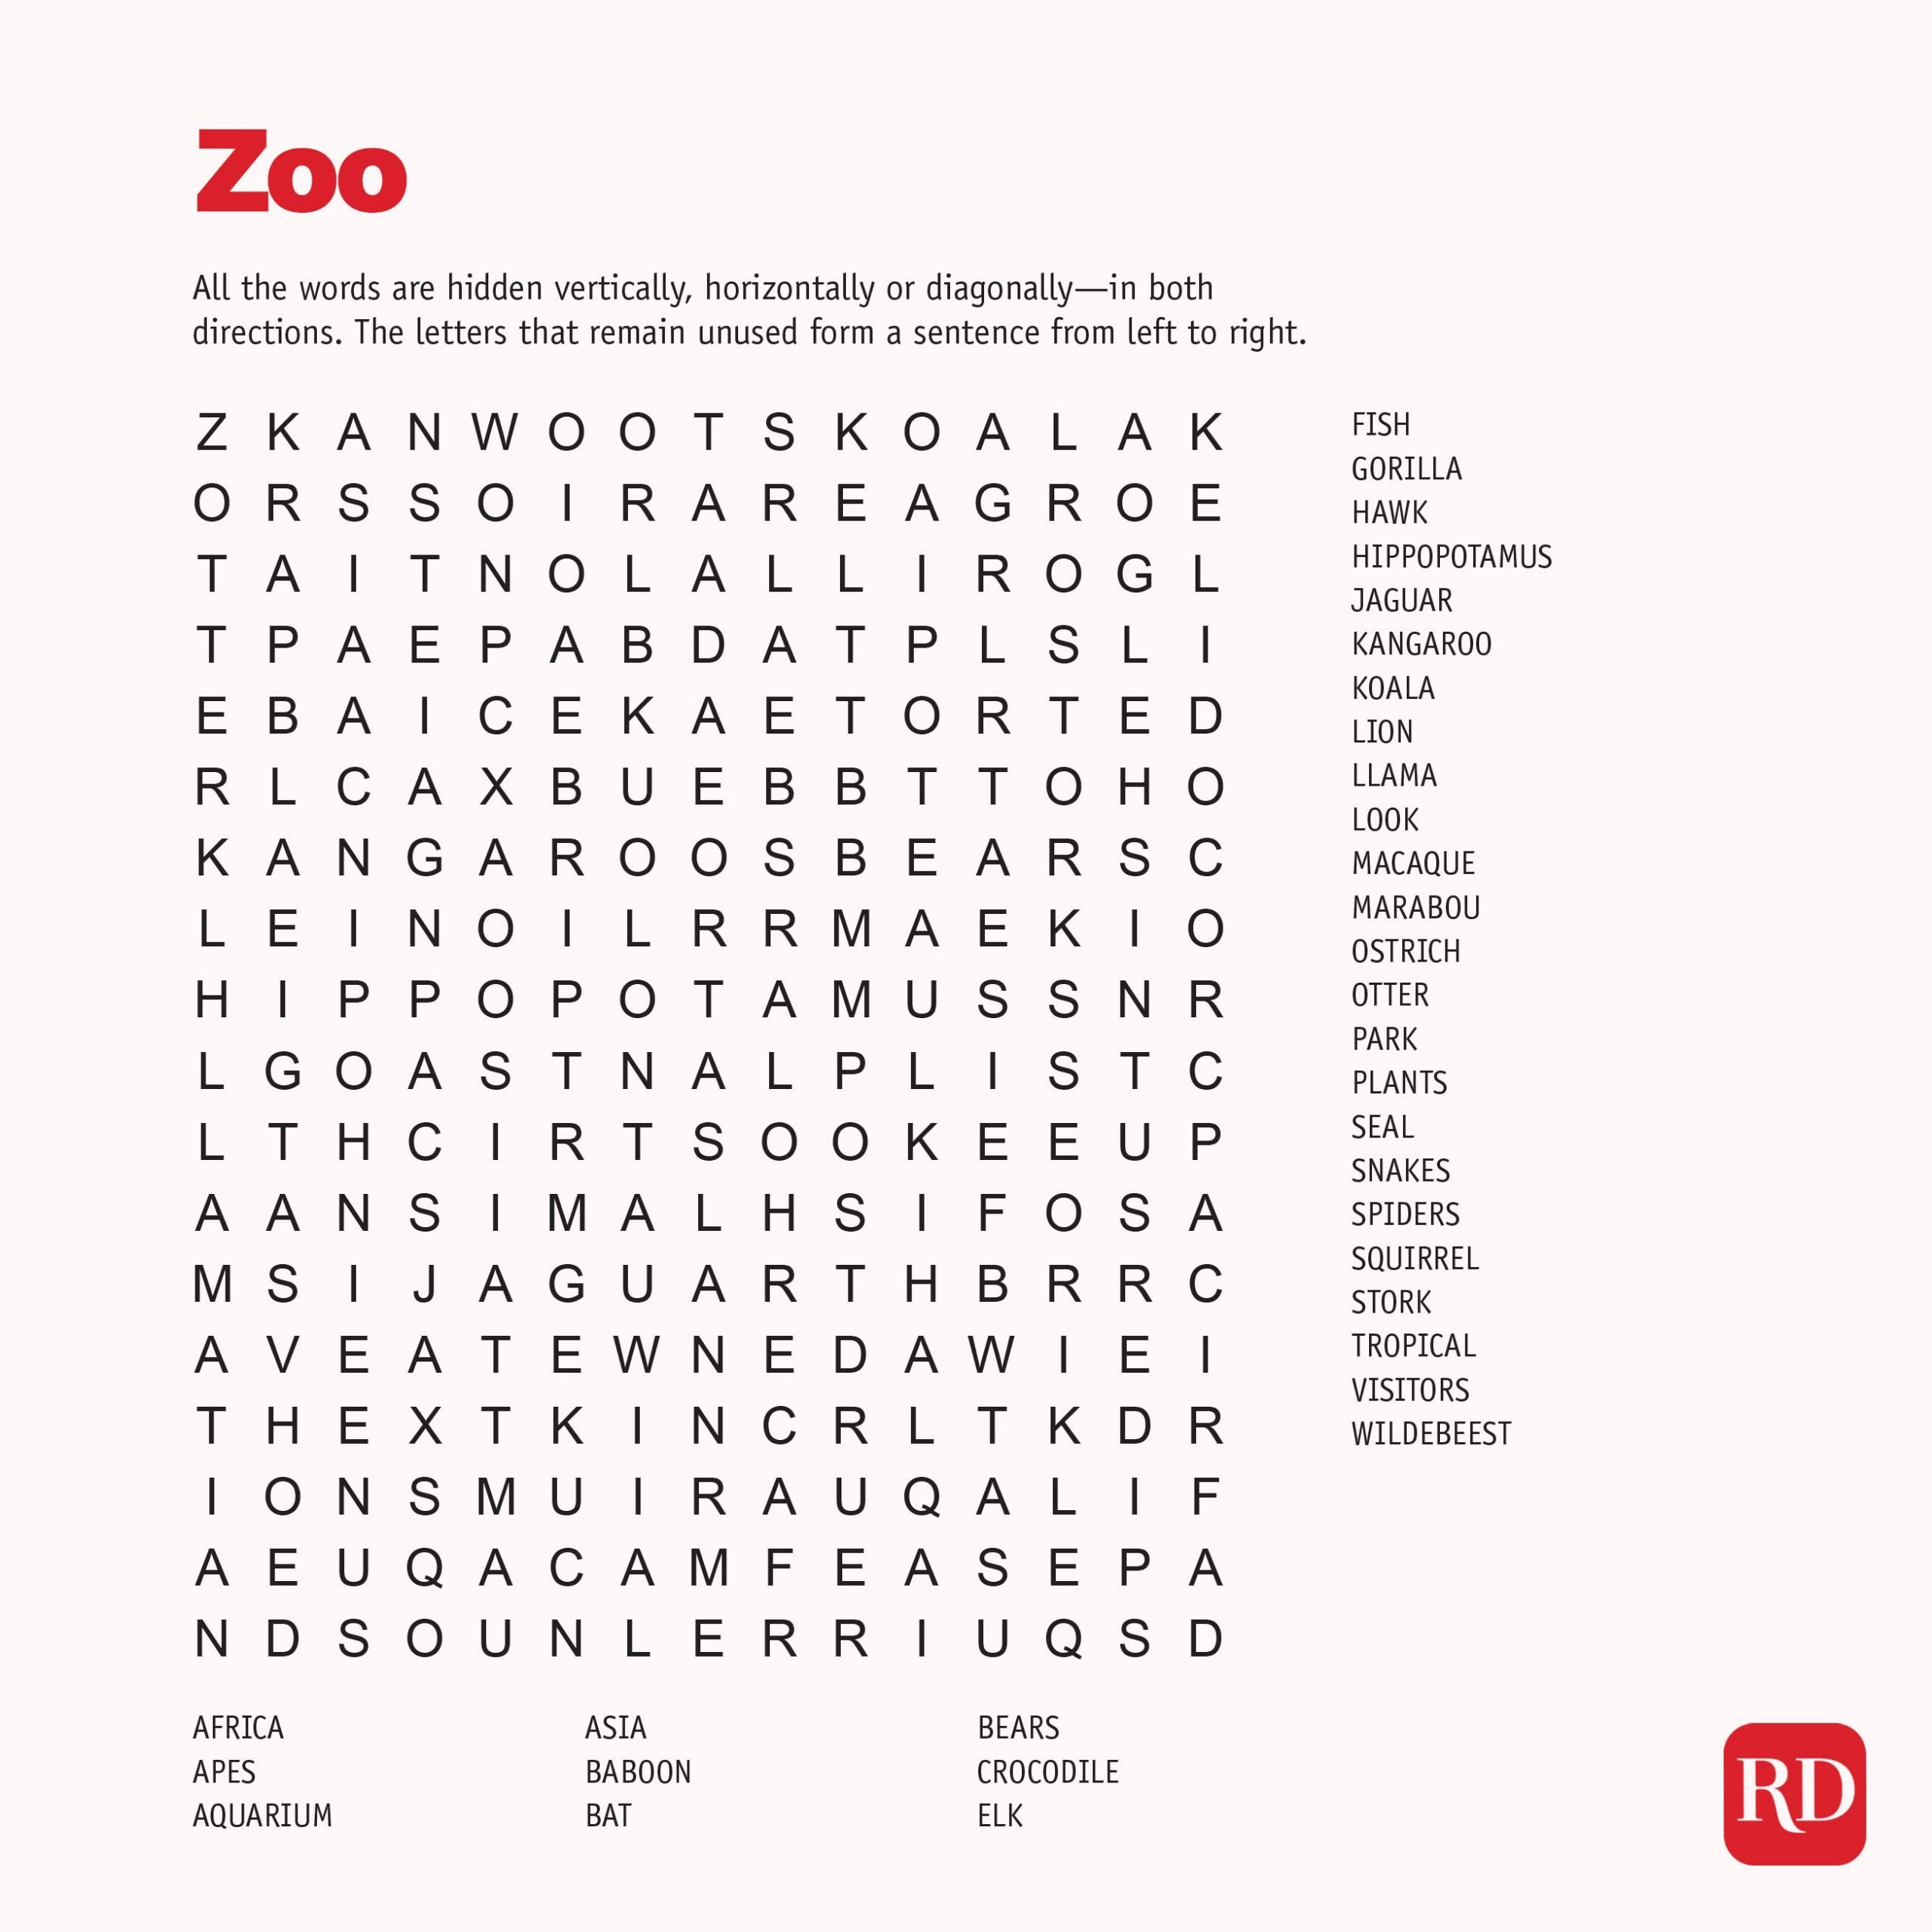 https://www.rd.com/wp-content/uploads/2020/04/zoo_wordsearch-scaled.jpg?fit=700%2C700